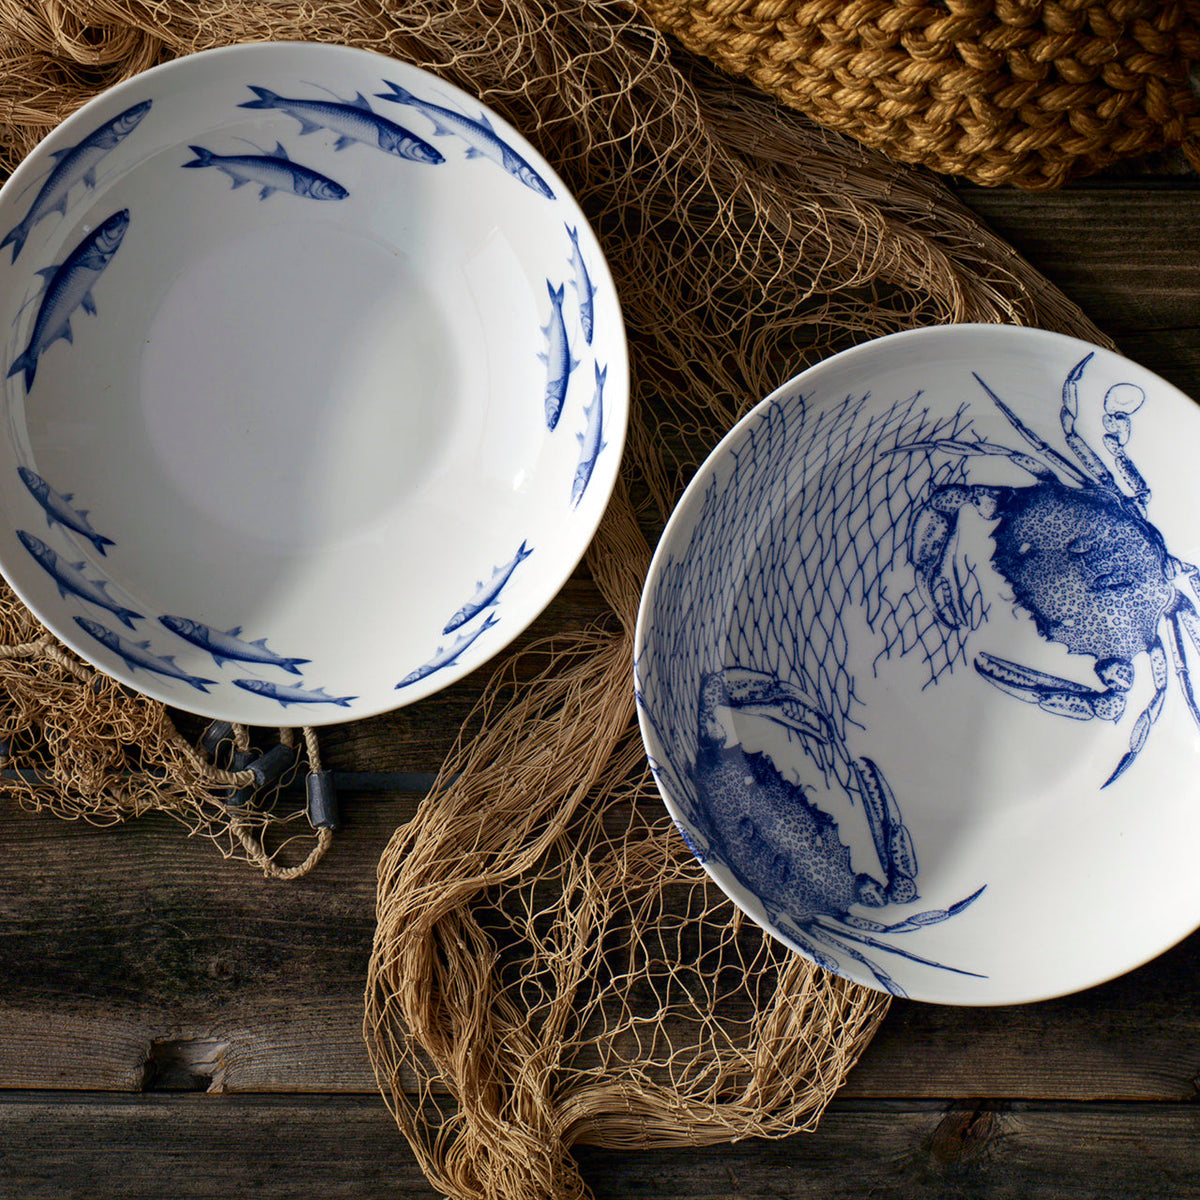 Two Crab Wide Serving Bowls by Caskata Artisanal Home on a wooden table.